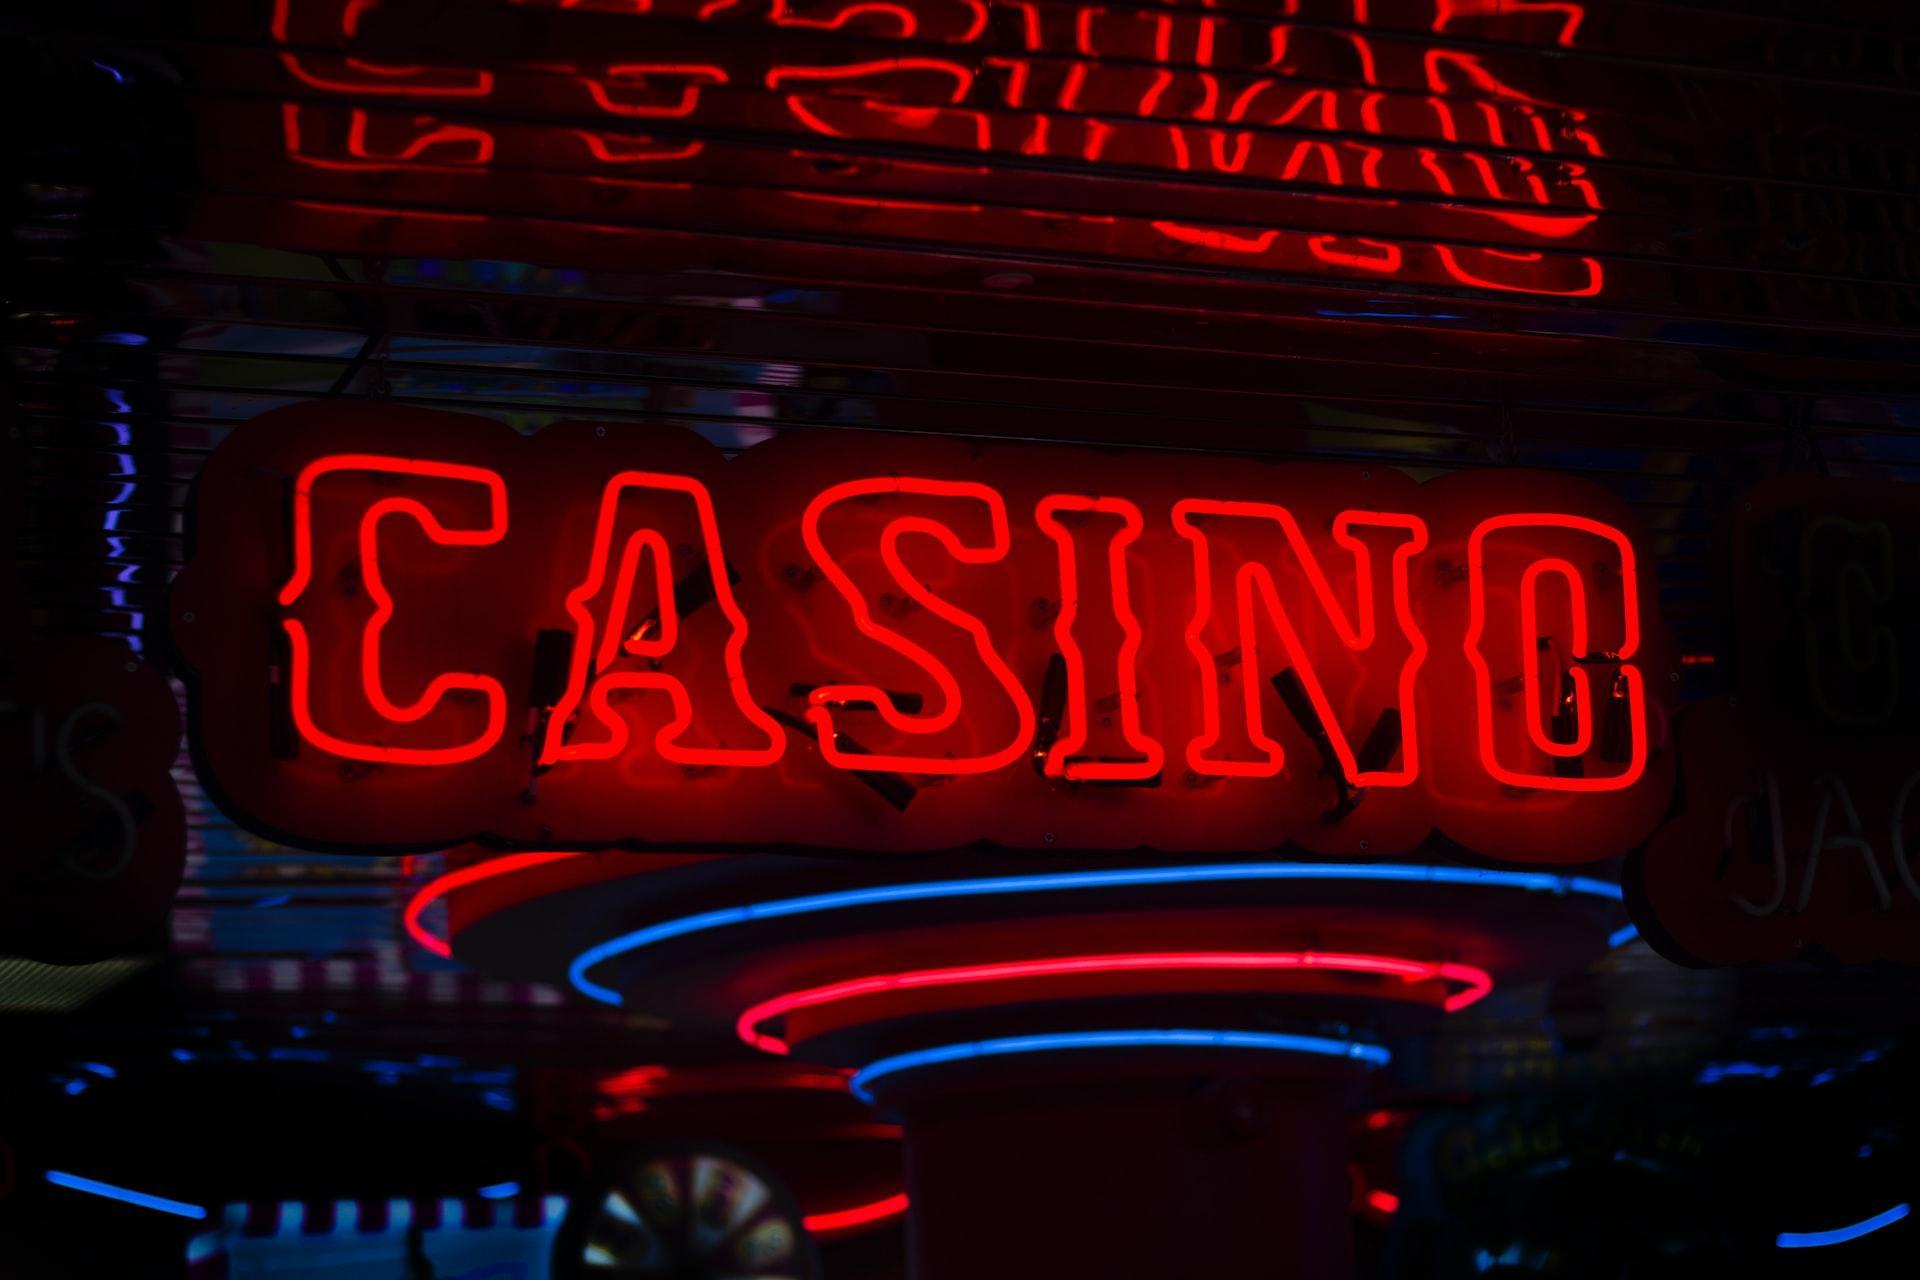 Geek insider, geekinsider, geekinsider. Com,, accepting the digital era: 4 factors contributing to the rise of online casinos, entertainment